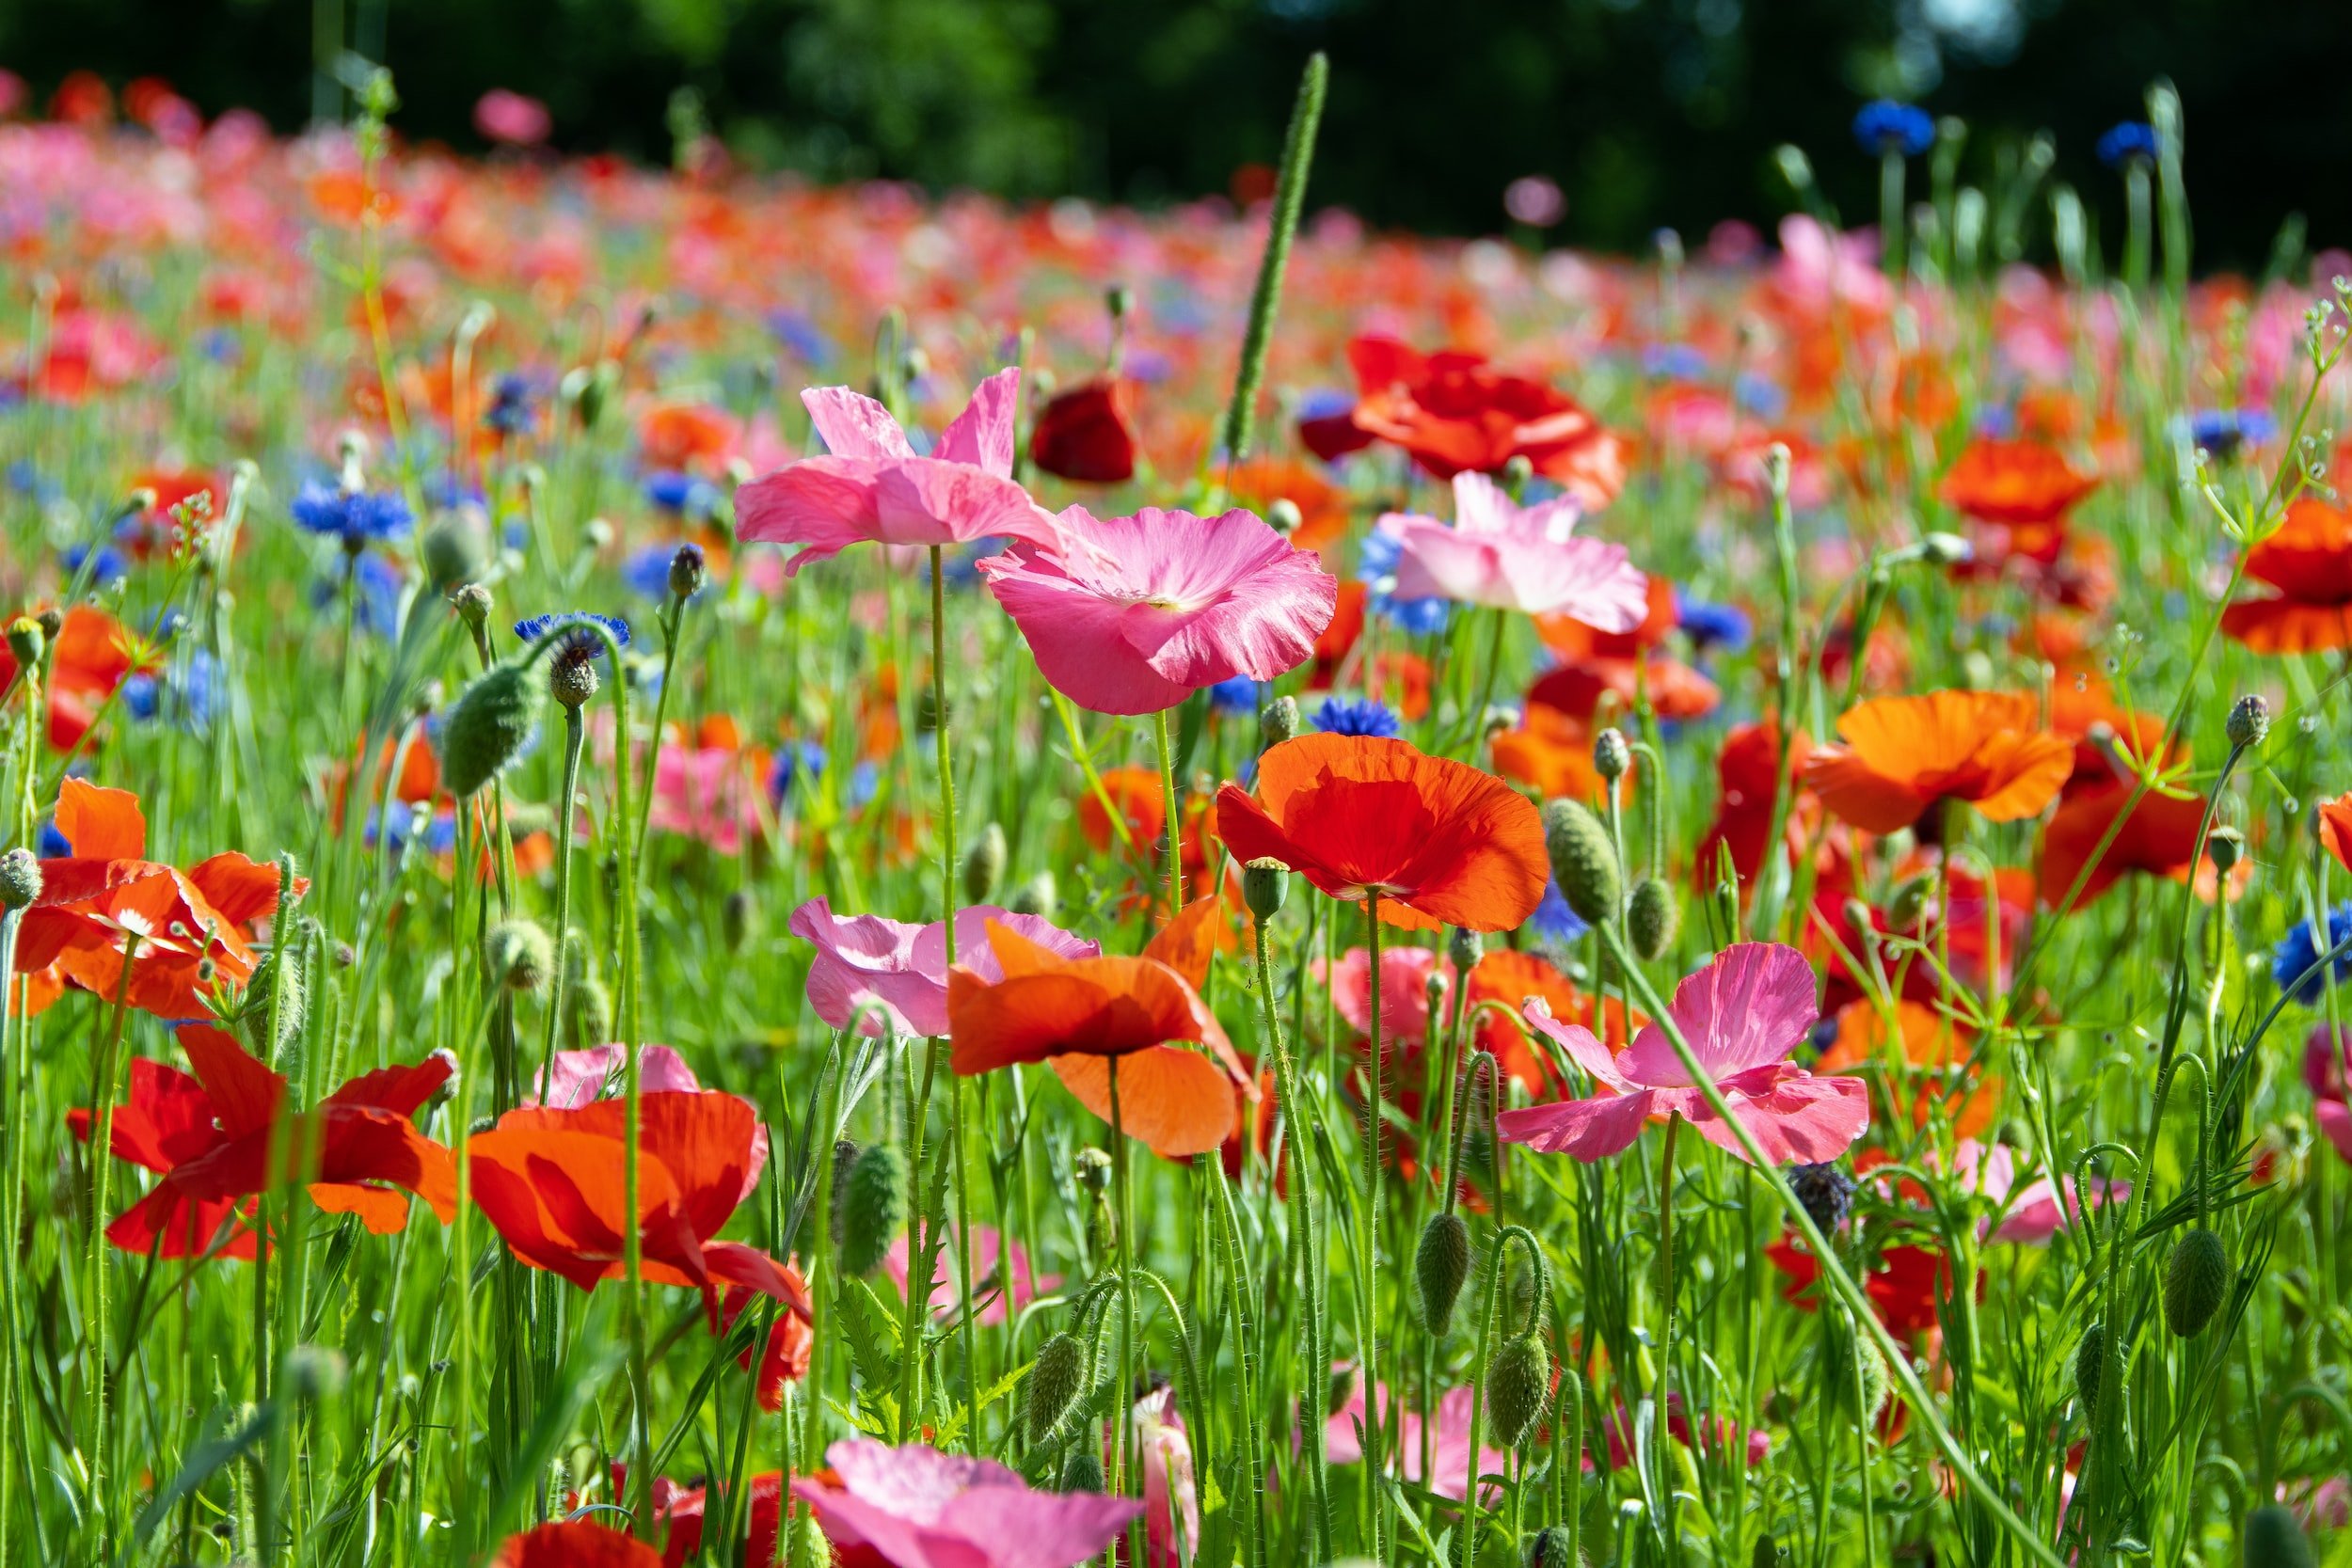 4 Tips for Growing a Beautiful Wildflower Garden - Sow Right Seeds